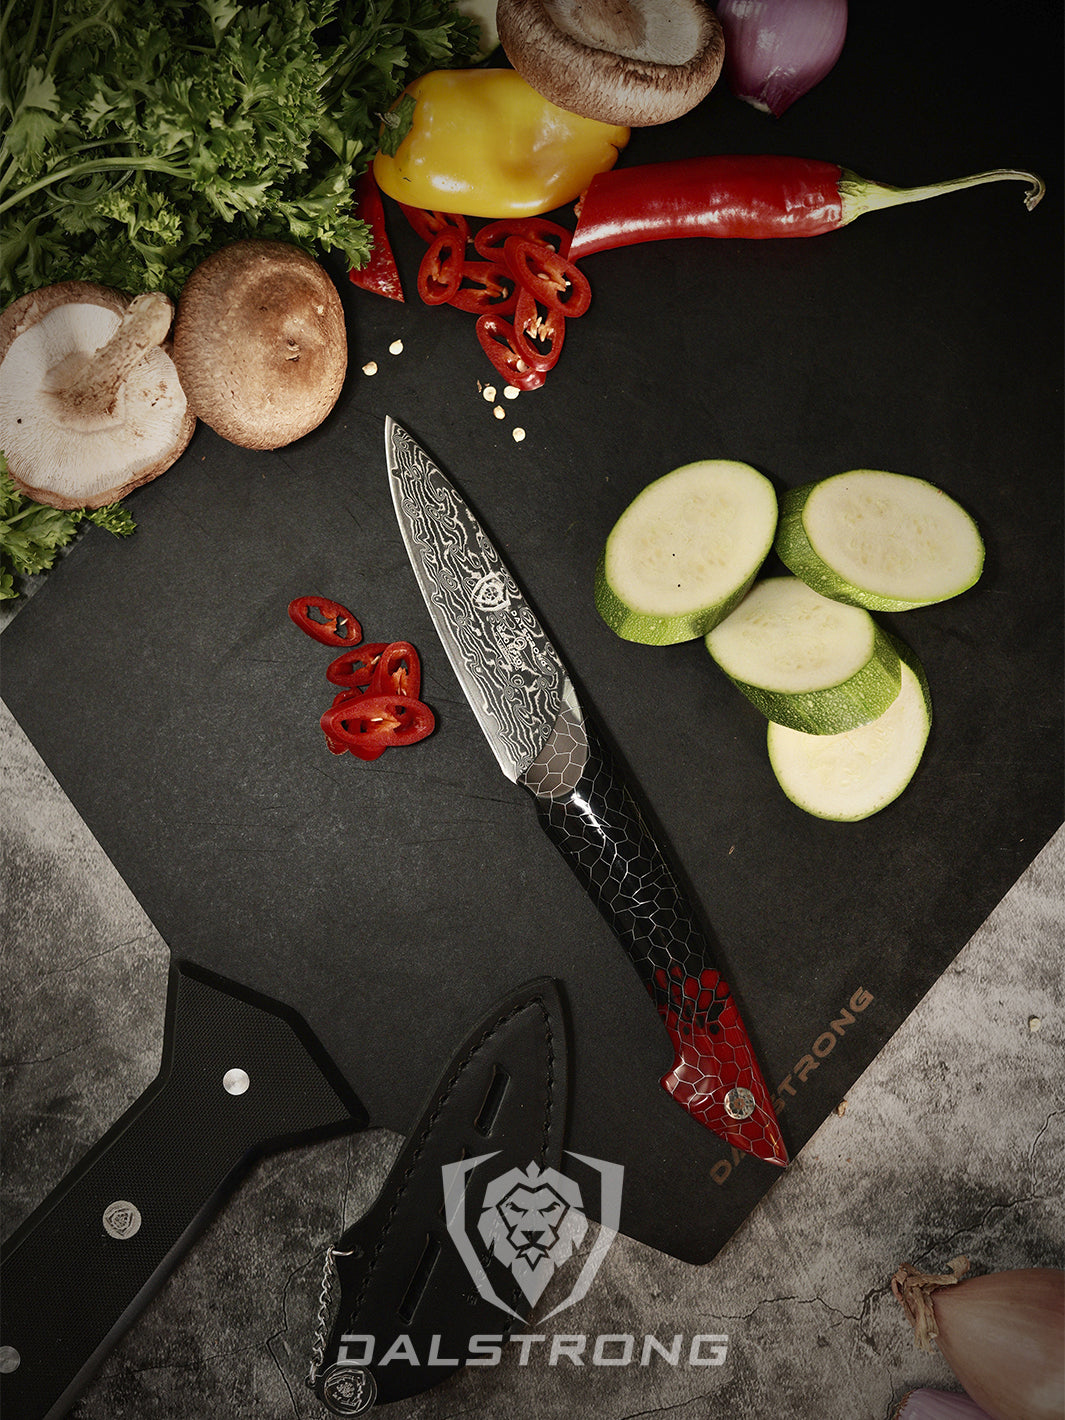 A Knife Set Will Deliver Perfect Slicing, Dicing, Peeling, and Paring